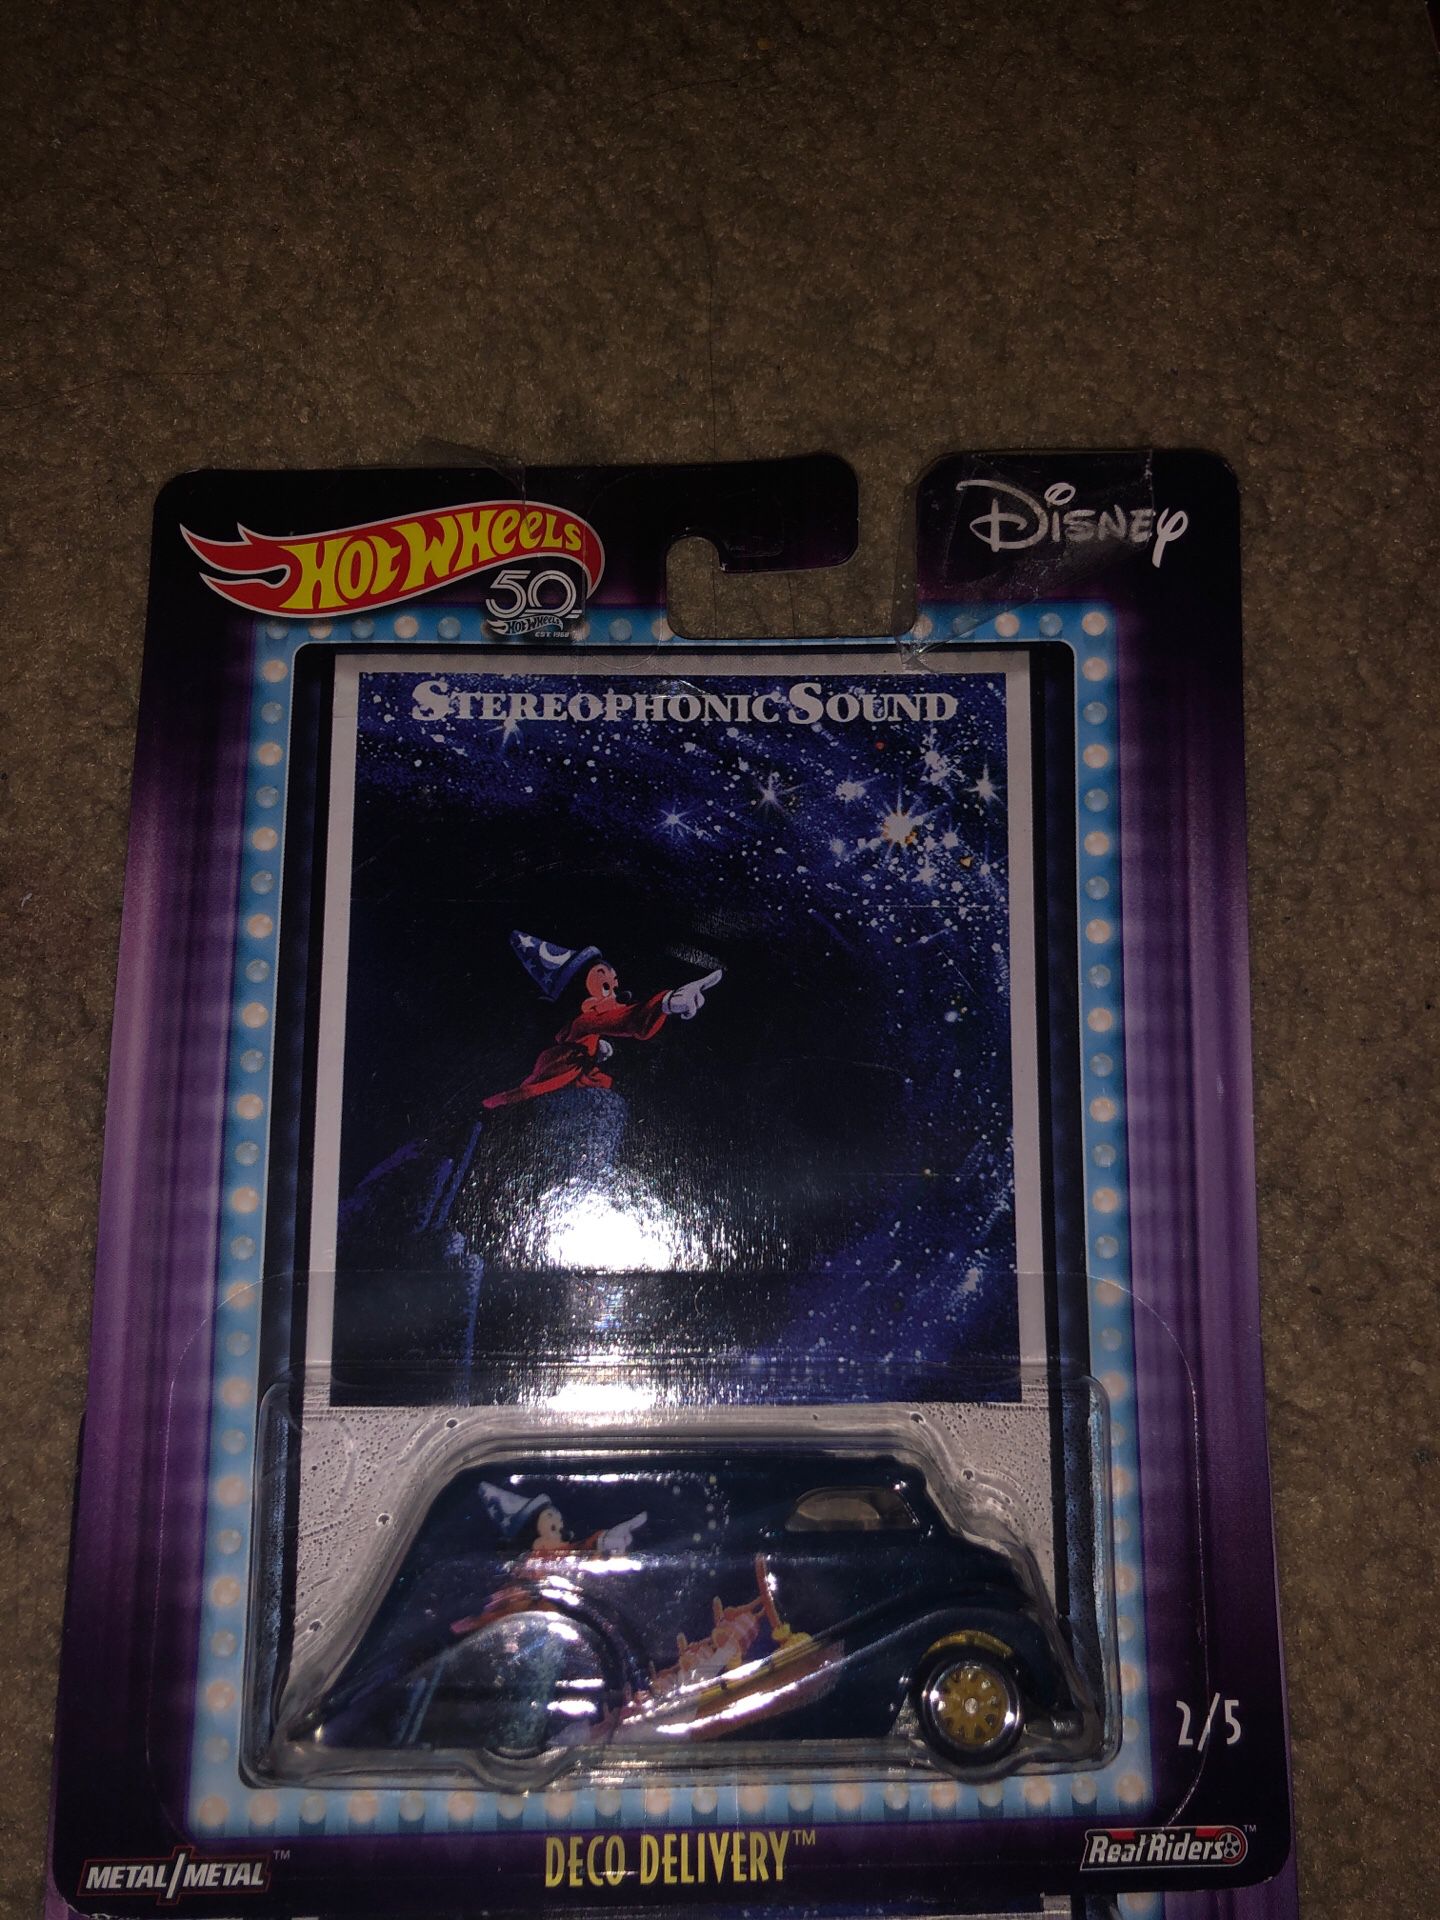 Classic Walt Disney Hot Wheels 50th edition collectors item. Unopened brand new. Real riders Dash metal/metal space DECL Delivery Fantasia Stereophon